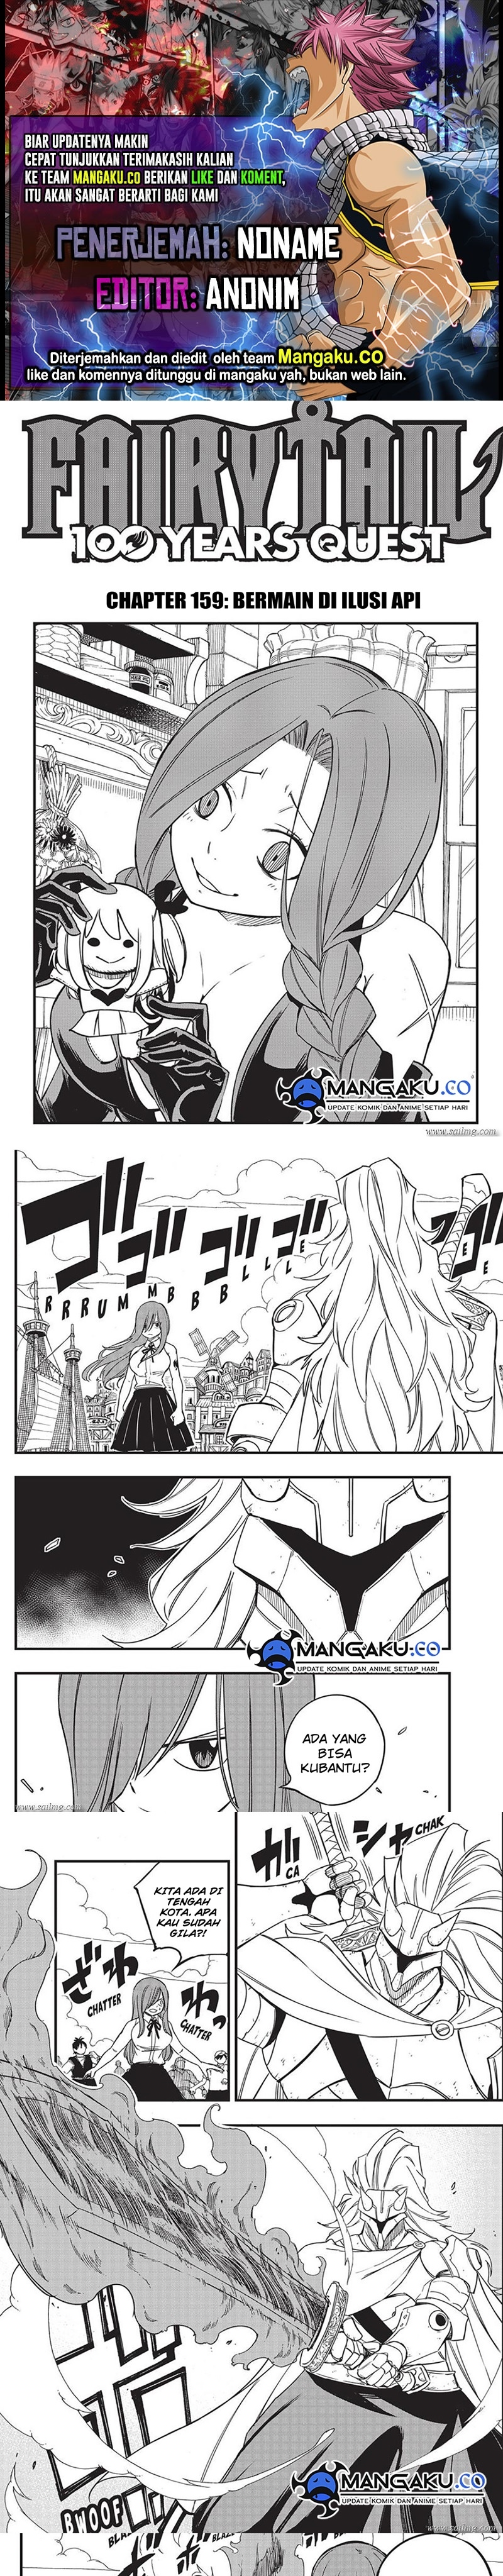 Fairy Tail: 100 Years Quest Chapter 159